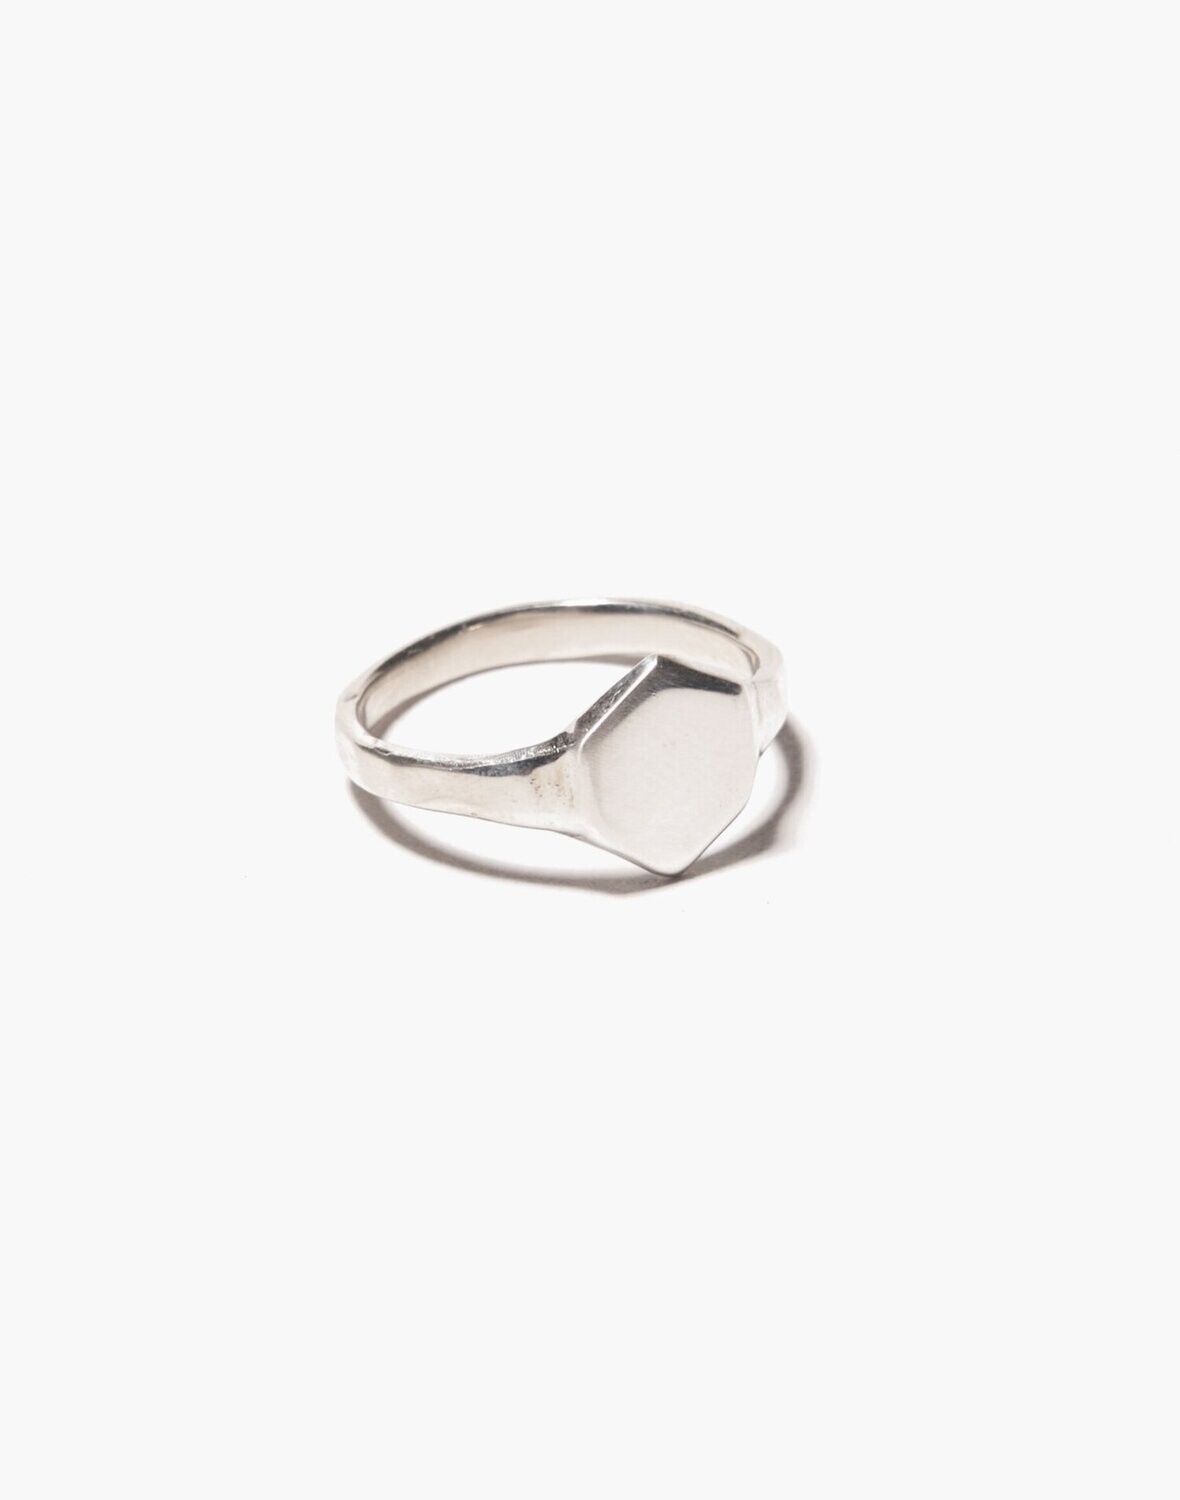 Odette NY Hex Signet Ring in Silver